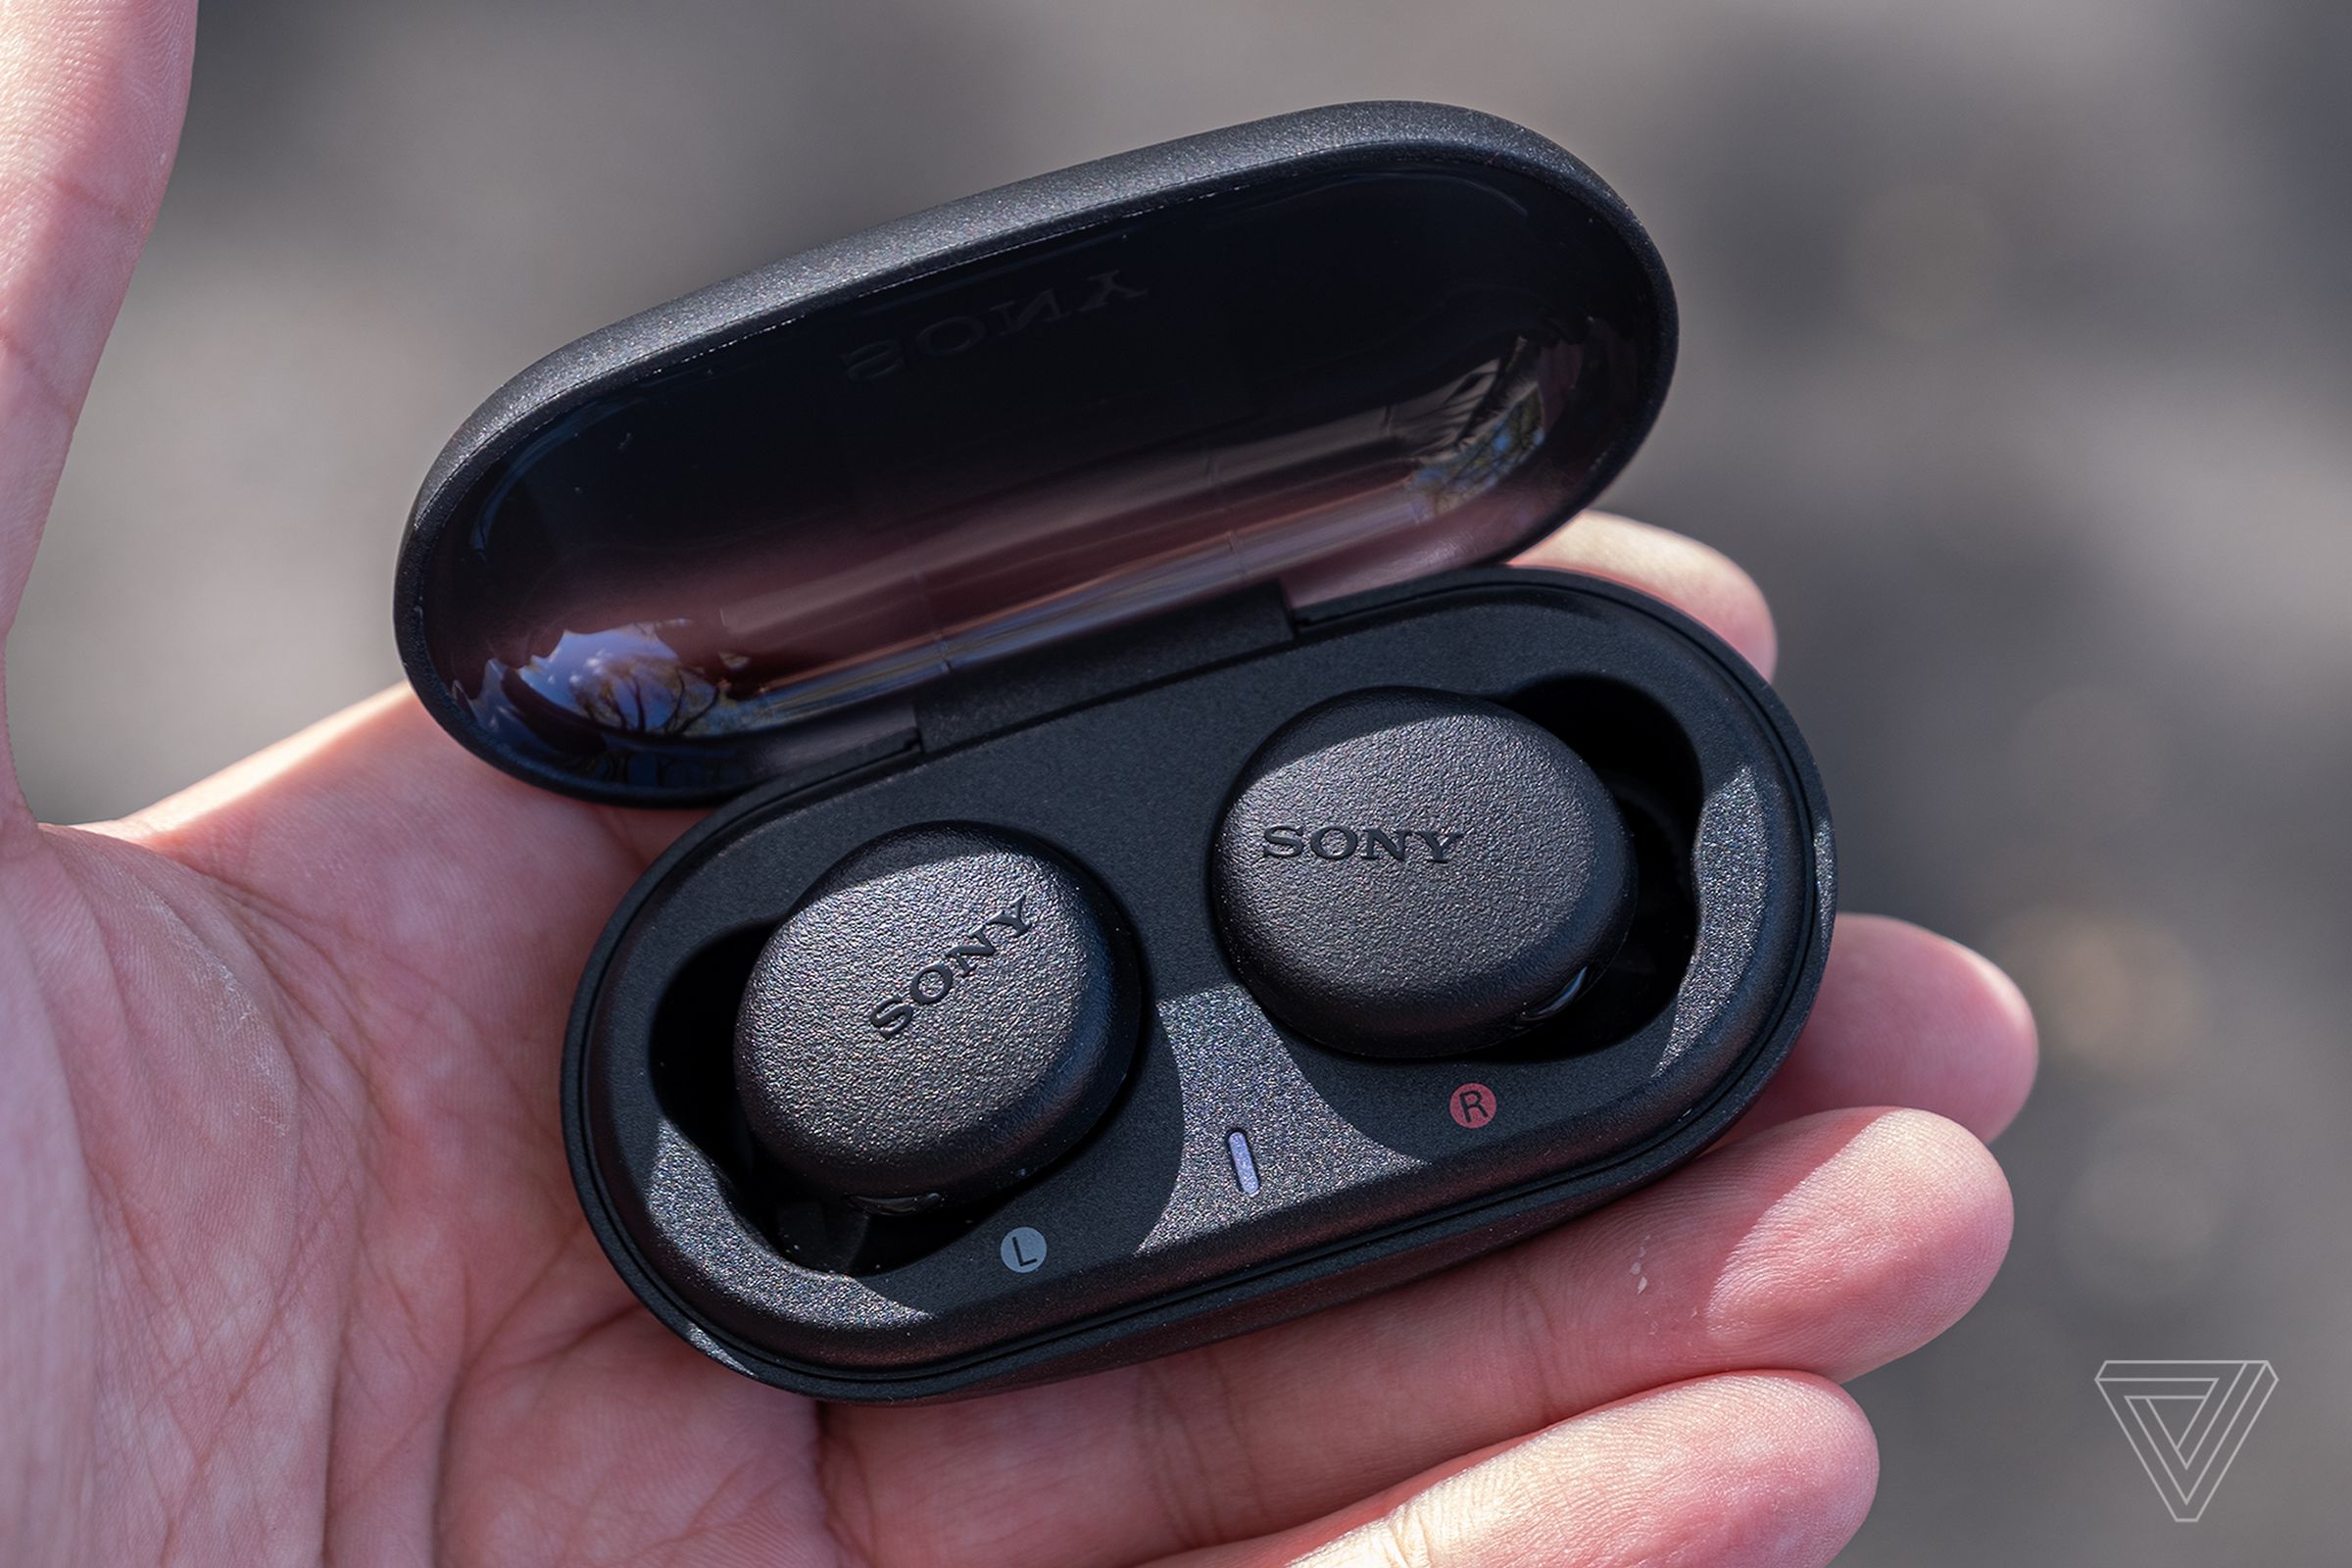 An image of the Sony WF-XB700, the best wireless earbuds if you can get a deal, in someone’s hand.